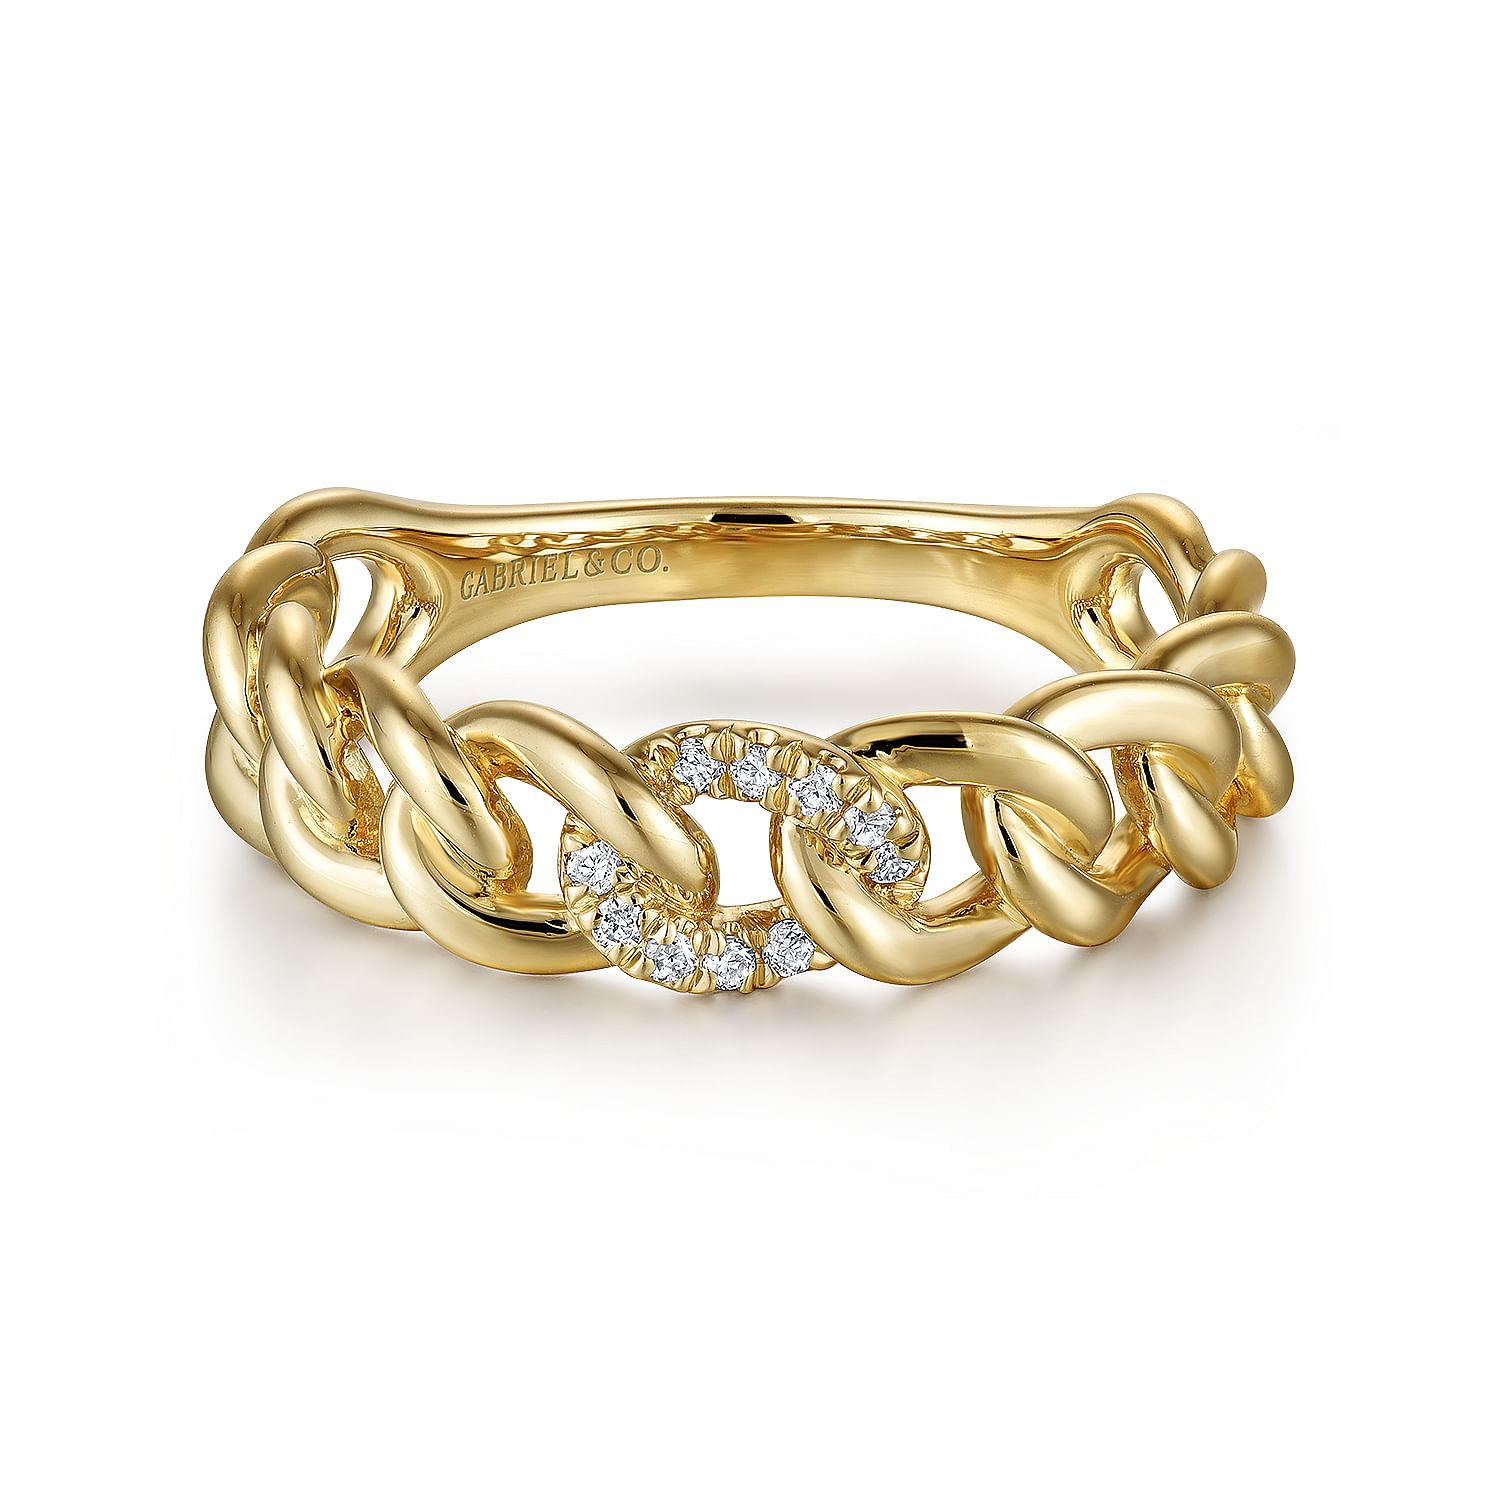 Gabriel - 14K Yellow Gold Chain Link Ring Band with Pavé Diamond Station